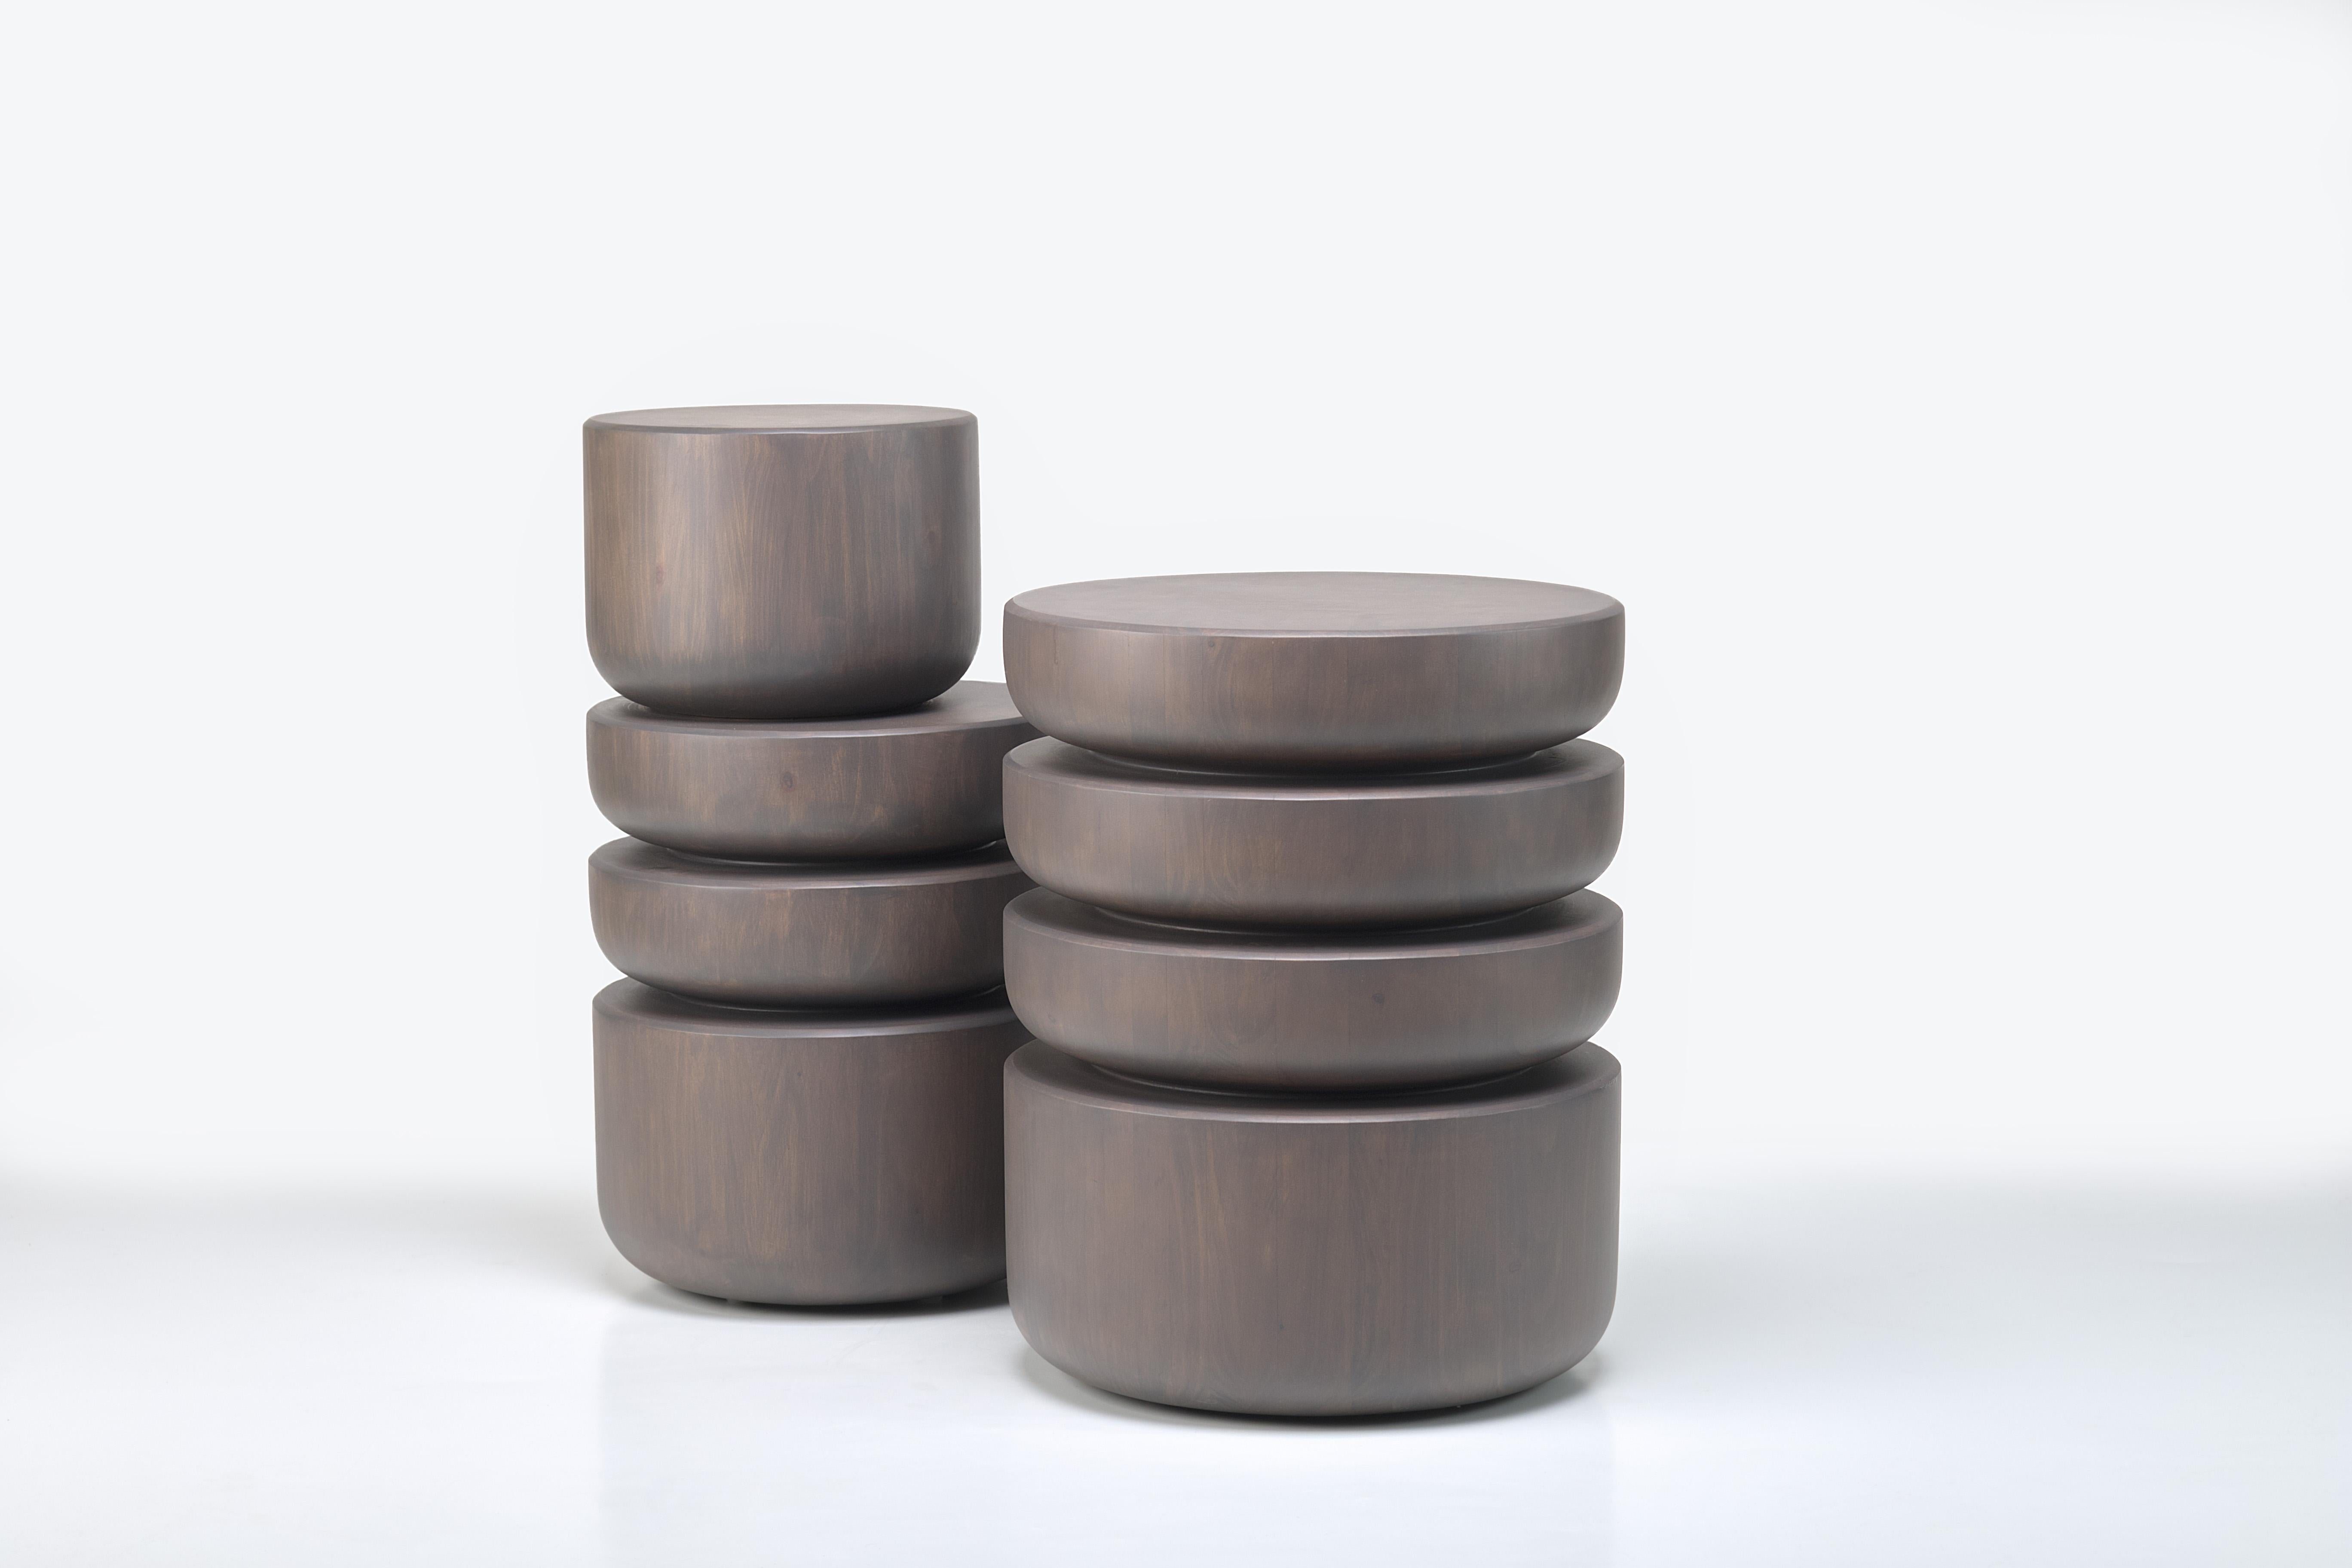 Revel in the rustic charm of our Barro Hand-Carved Table, a stunning homage to the artisanal heritage of the Chinautla region in Guatemala. Skillfully crafted to mirror the appearance of stacked clay pots and trays that are iconic to this region,